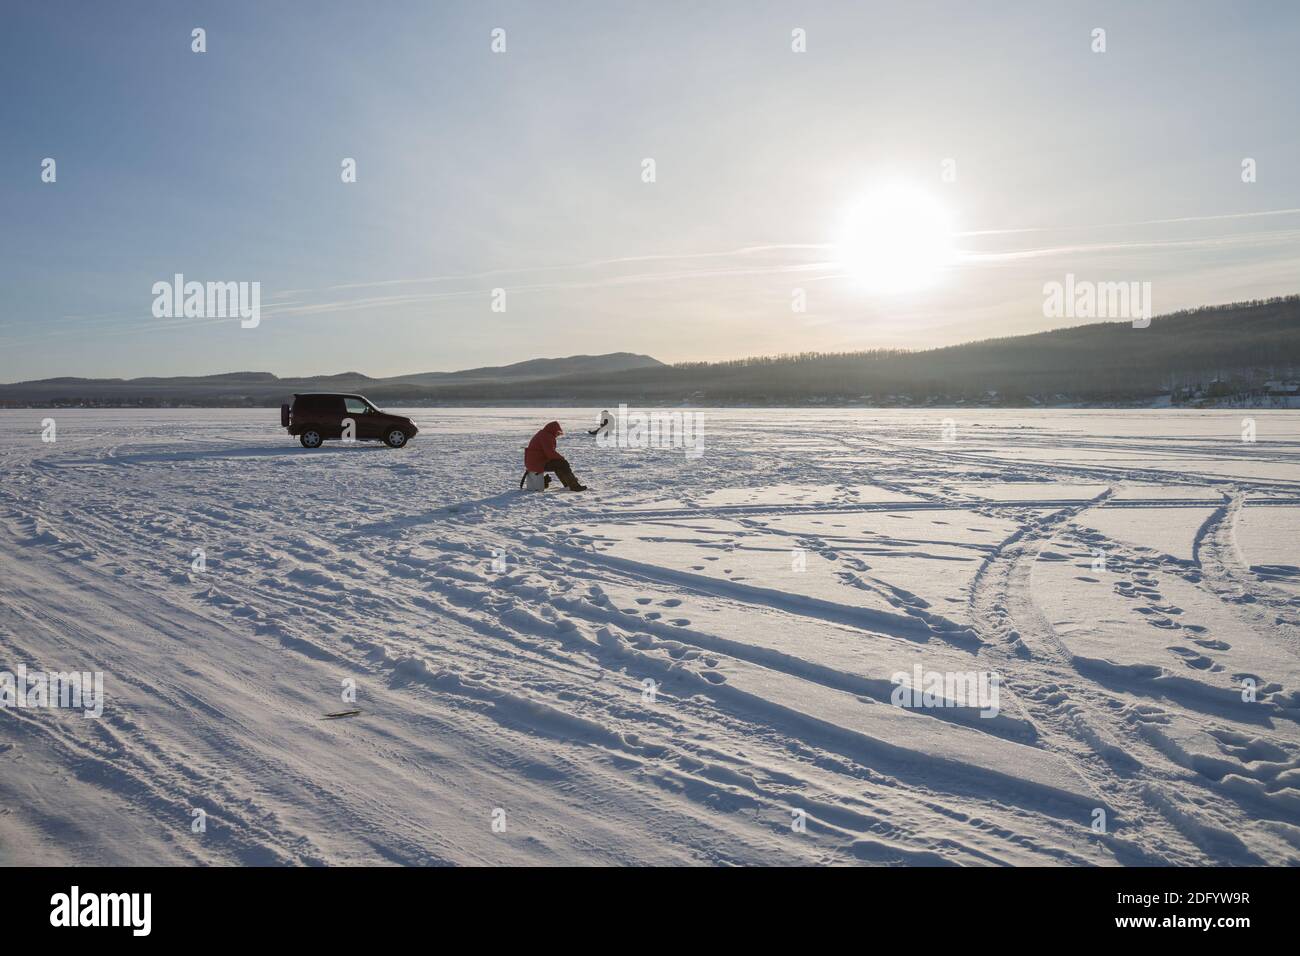 Fishermen catch fish on a snowy lake, in the evening light. Stock Photo